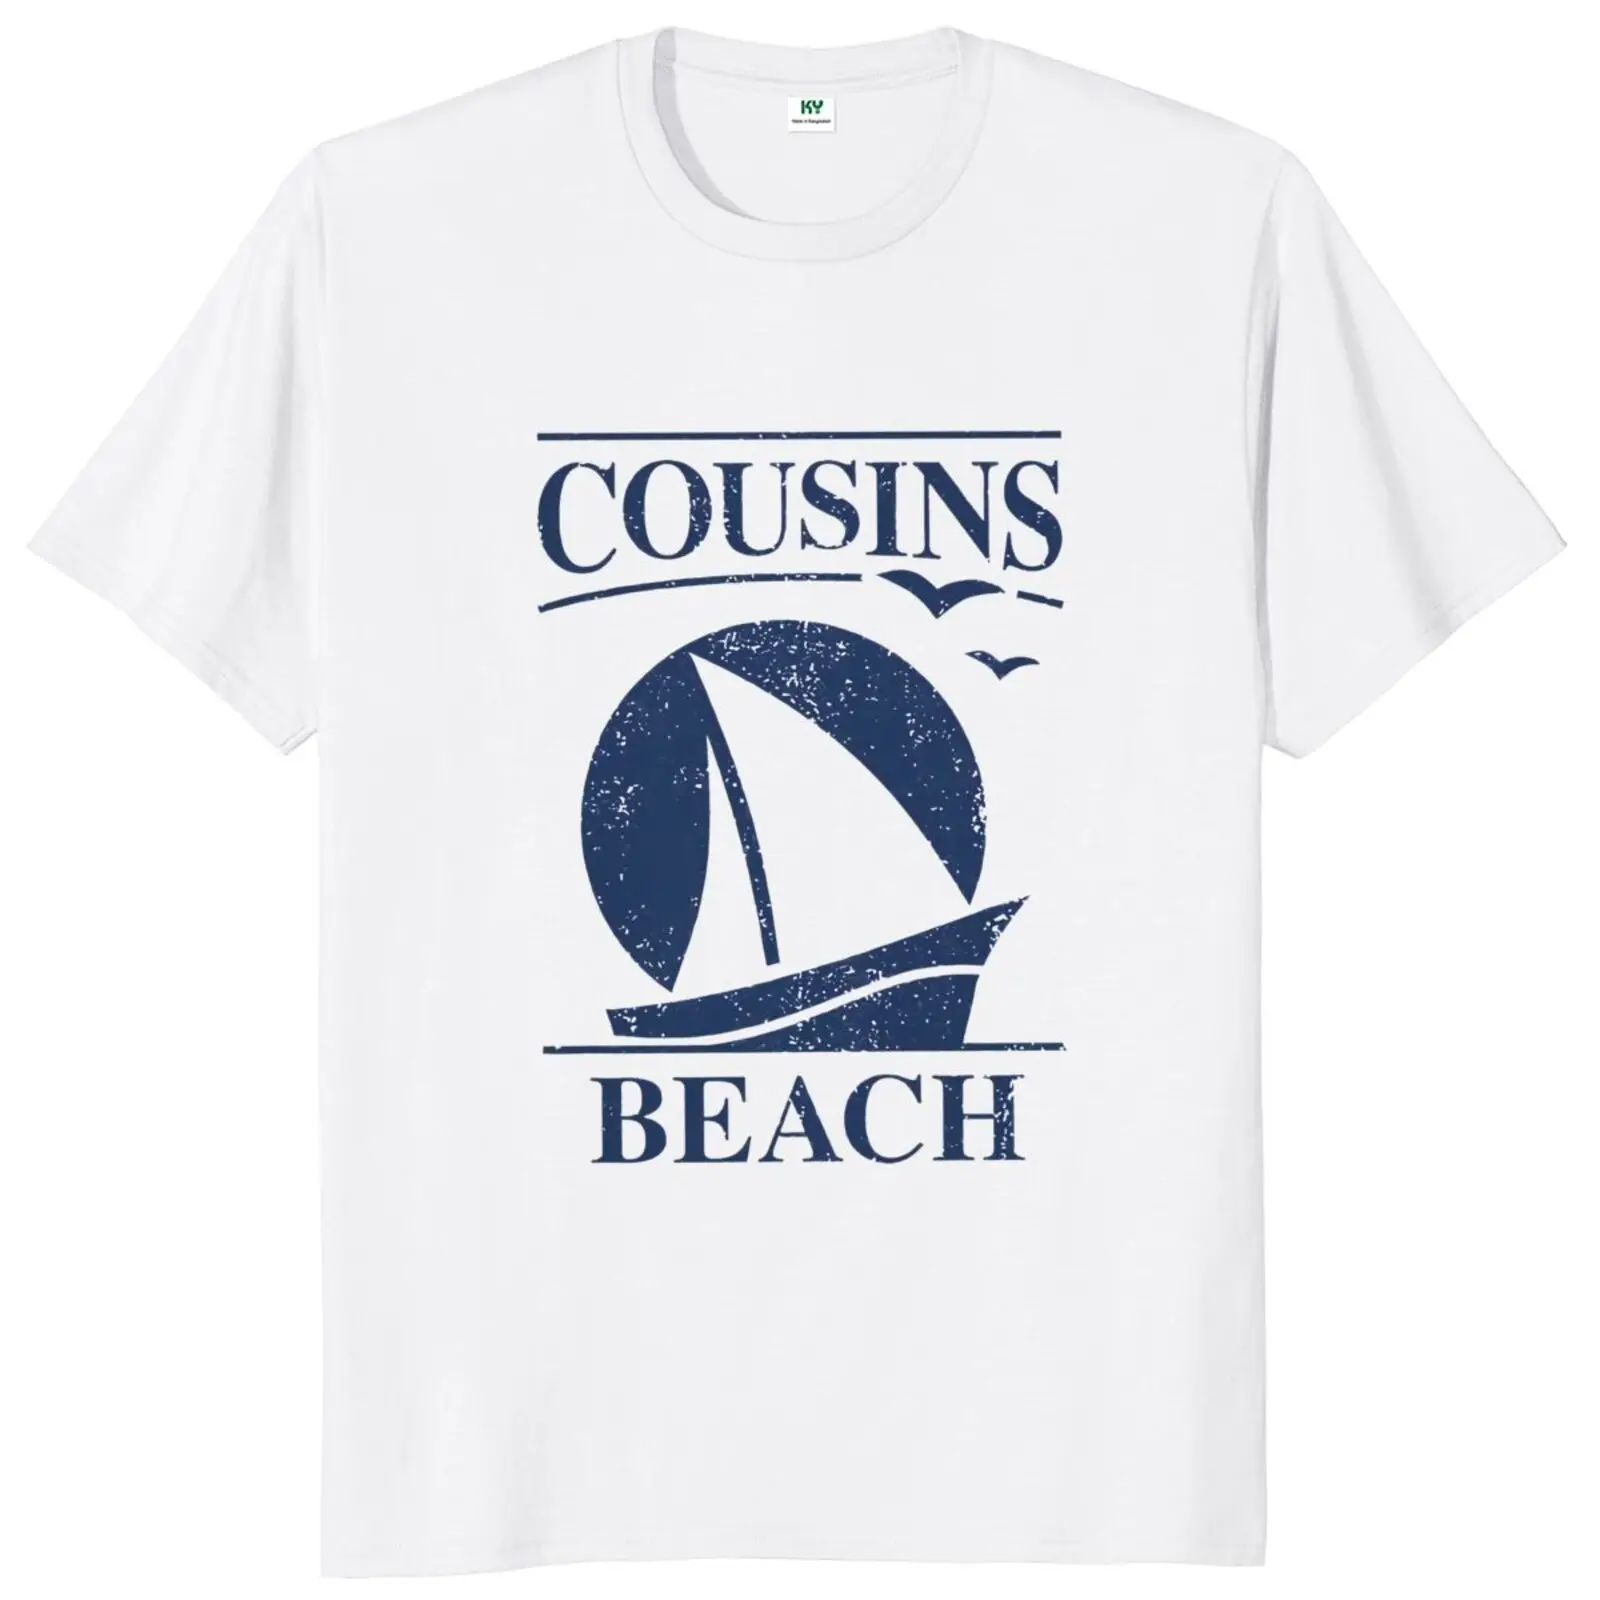 

The Summer I Turned Pretty T-shirt Adult Romance Drama TV Series Boat Cousins Beach Fans Tee Tops Summer Cotton Soft T Shirts